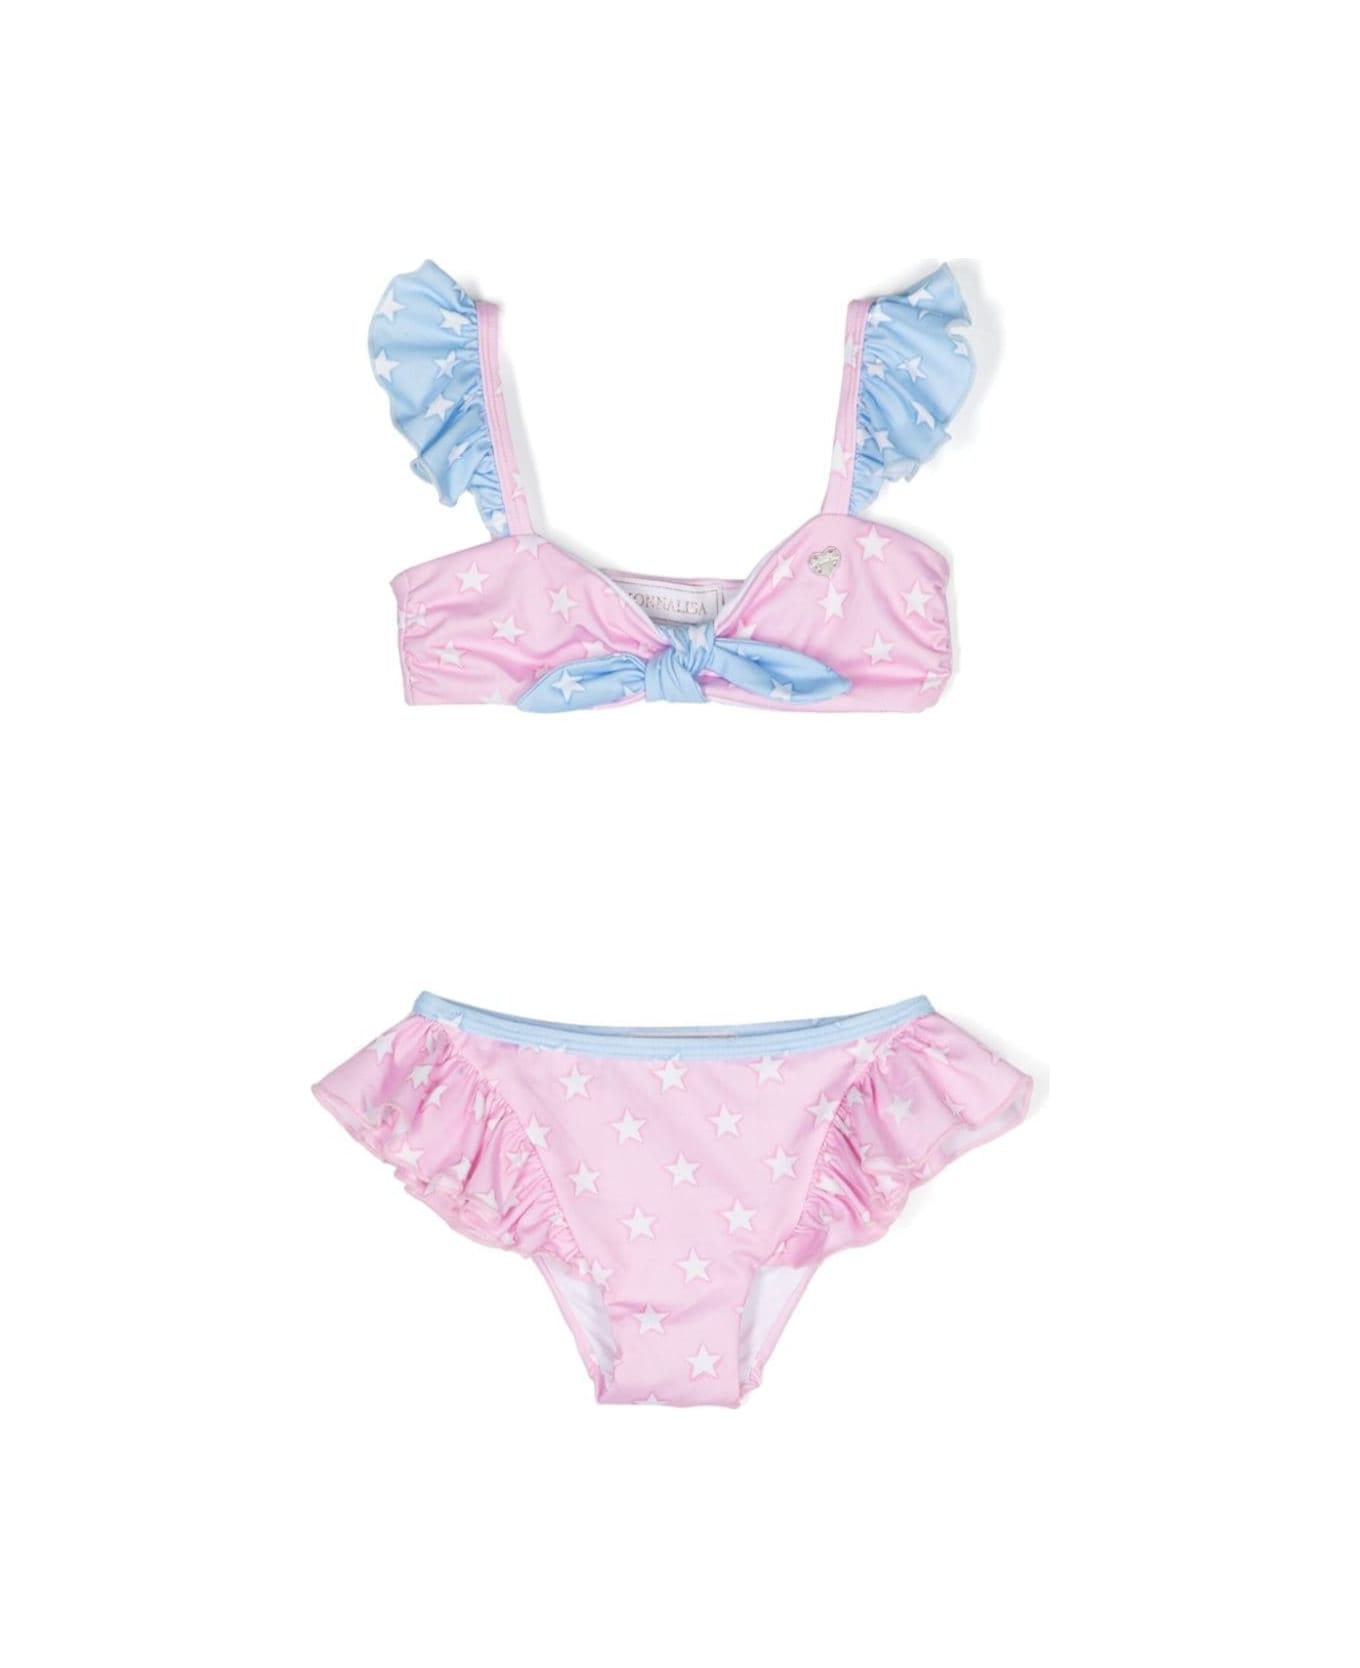 Monnalisa Pink And Light Two Piece Bikini Set With Star Print In Stretch Fabric Girl - Multicolor 水着